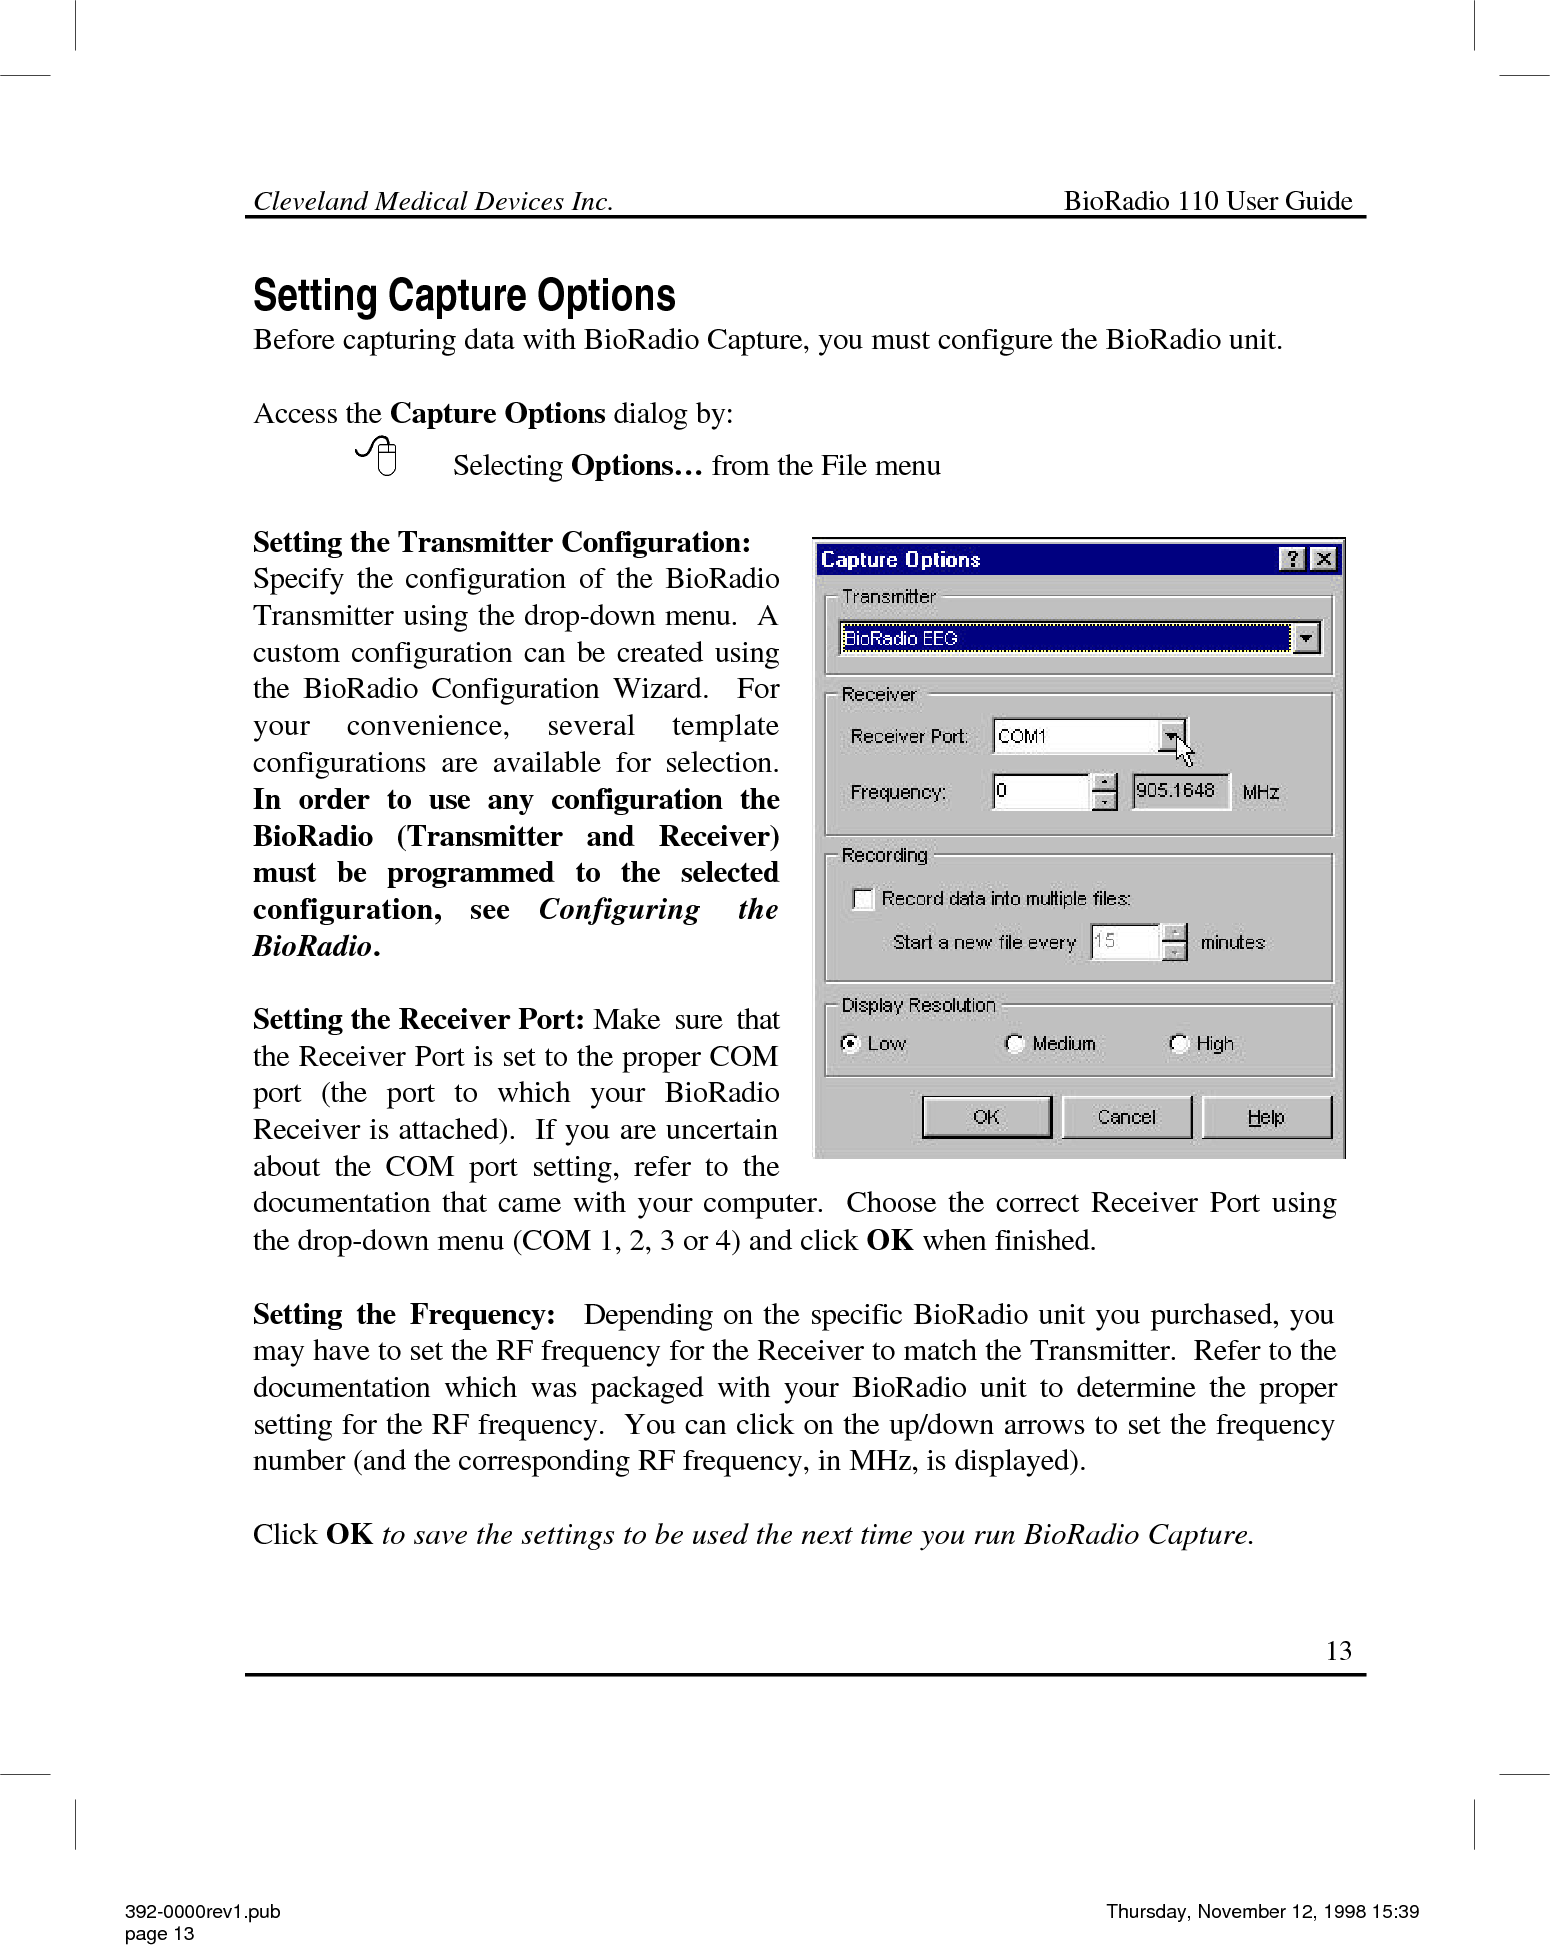 Cleveland Medical Devices Inc.                                                             BioRadio 110 User Guide                                                                                                                                                   13 Setting Capture Options Before capturing data with BioRadio Capture, you must configure the BioRadio unit.  Access the Capture Options dialog by:   8 Selecting Options… from the File menu   Setting the Transmitter Configuration: Specify the configuration of the BioRadio Transmitter using the drop-down menu.  A custom configuration can be created using the BioRadio Configuration Wizard.  For your convenience, several template configurations are available for selection.  In order to use any configuration the BioRadio (Transmitter and Receiver) must be programmed to the selected configuration, see Configuring the BioRadio.   Setting the Receiver Port: Make sure that the Receiver Port is set to the proper COM port (the port to which your BioRadio Receiver is attached).  If you are uncertain about the COM port setting, refer to the documentation that came with your computer.  Choose the correct Receiver Port using the drop-down menu (COM 1, 2, 3 or 4) and click OK when finished.  Setting the Frequency:  Depending on the specific BioRadio unit you purchased, you may have to set the RF frequency for the Receiver to match the Transmitter.  Refer to the documentation which was packaged with your BioRadio unit to determine the proper setting for the RF frequency.  You can click on the up/down arrows to set the frequency number (and the corresponding RF frequency, in MHz, is displayed).   Click OK to save the settings to be used the next time you run BioRadio Capture. 392-0000rev1.pub page 13 Thursday, November 12, 1998 15:39 